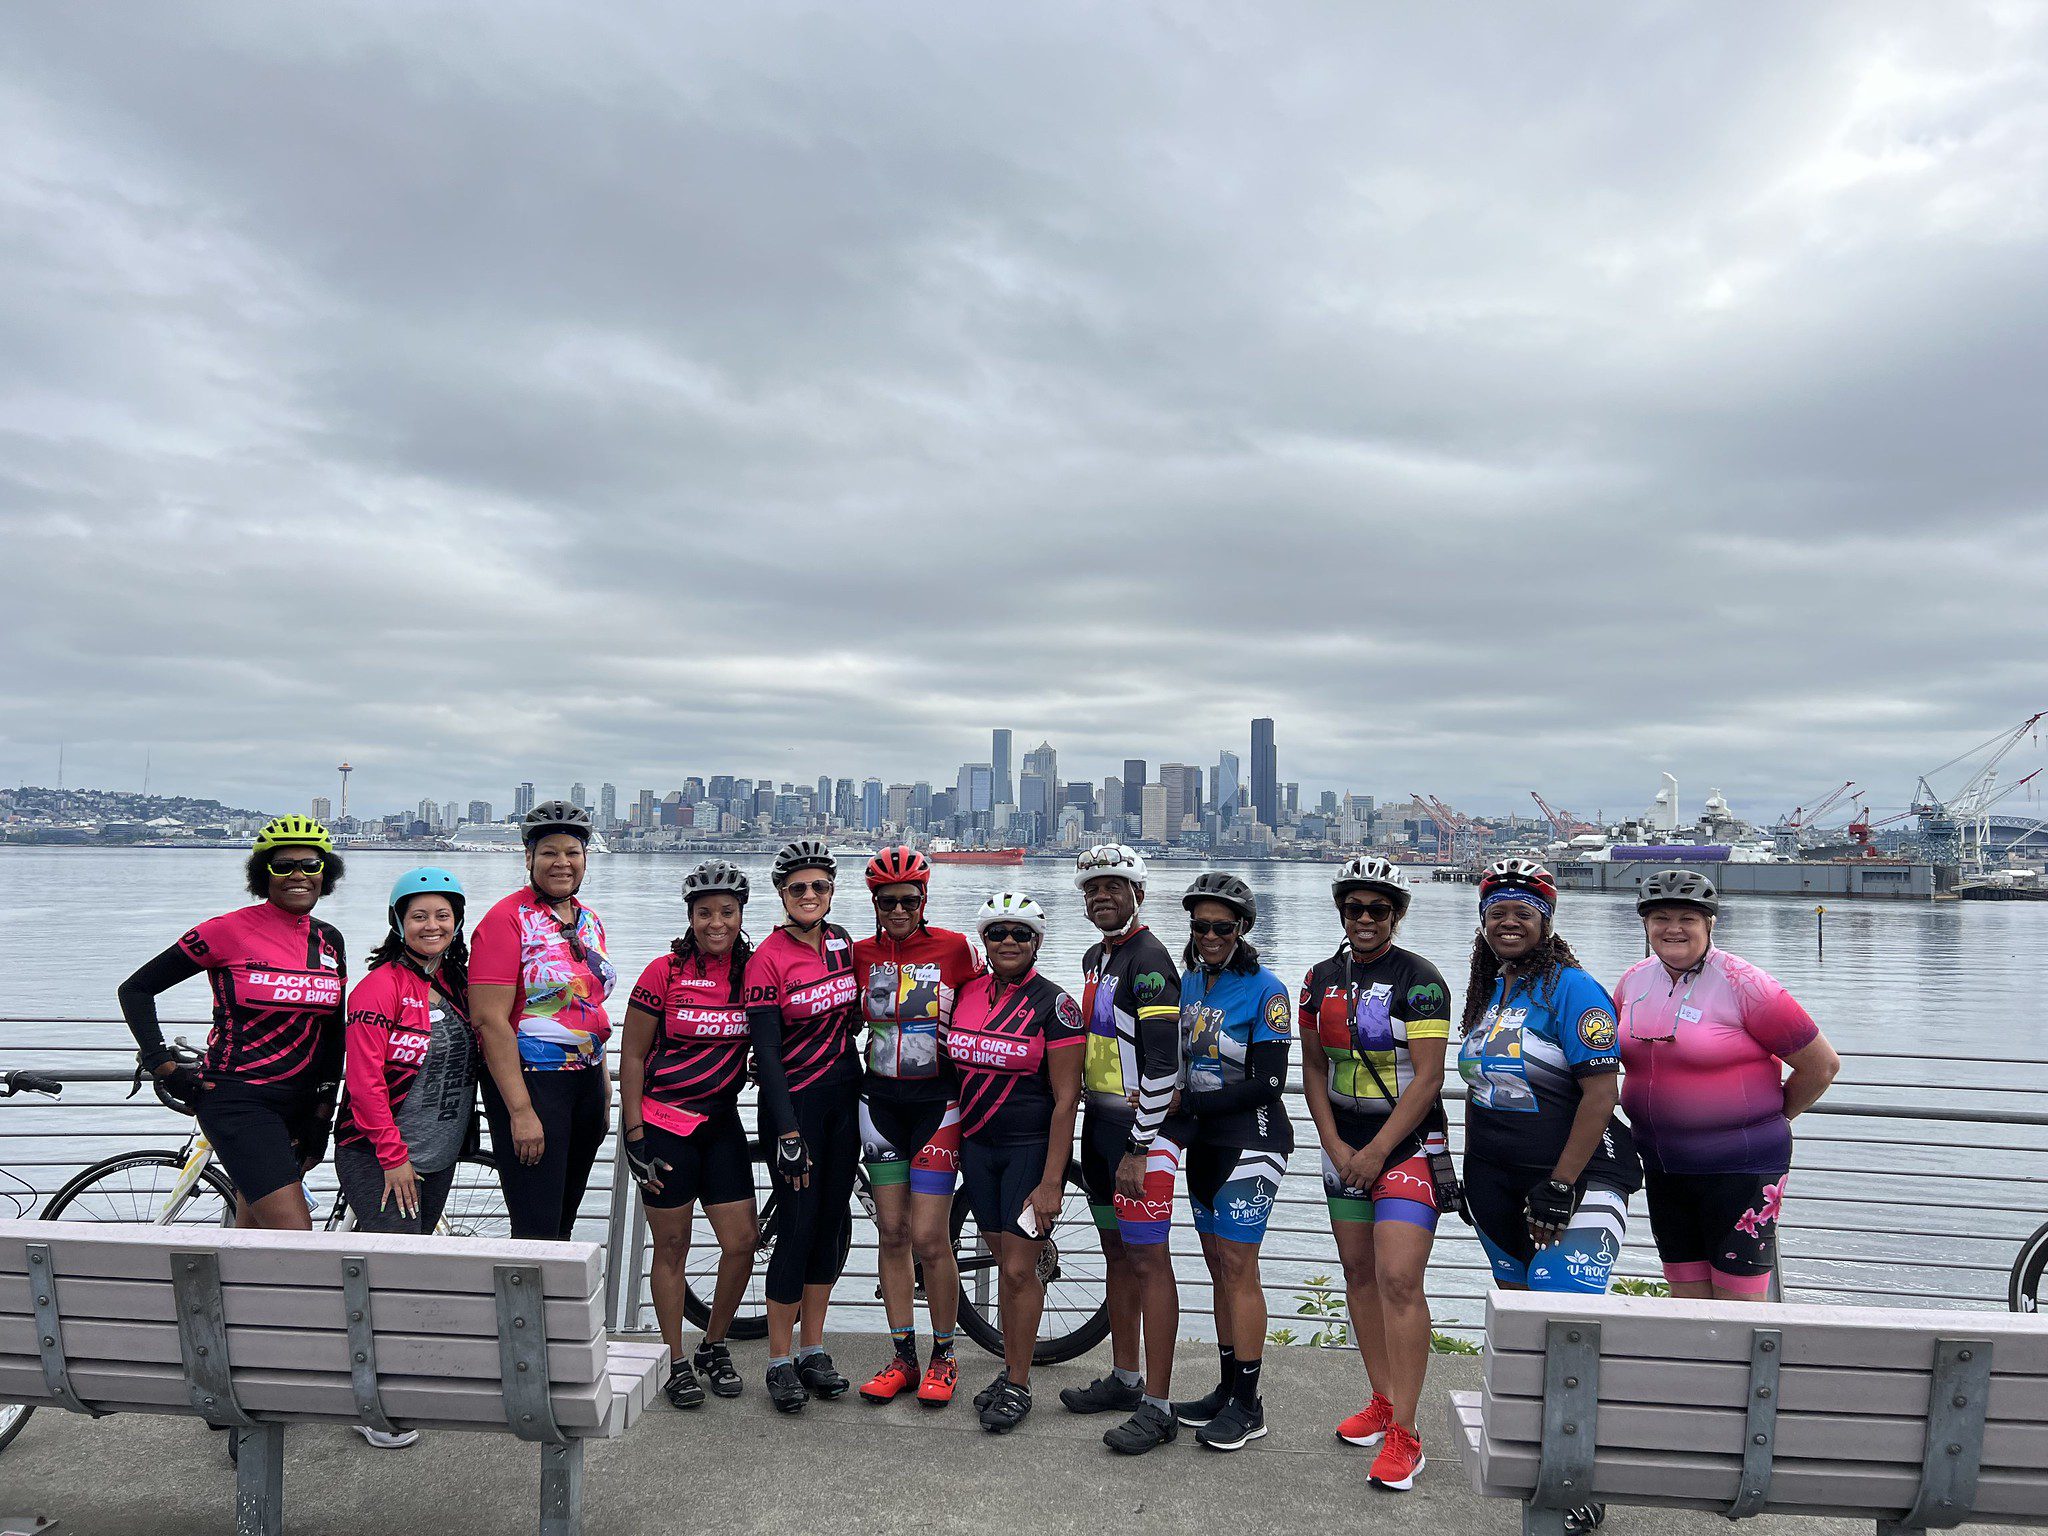 Photo of 12 people smiling while wearing biking outfits and helmets. The group is standing in front of water and a cityscape including large buildings in the background. Two benches are in the foreground.